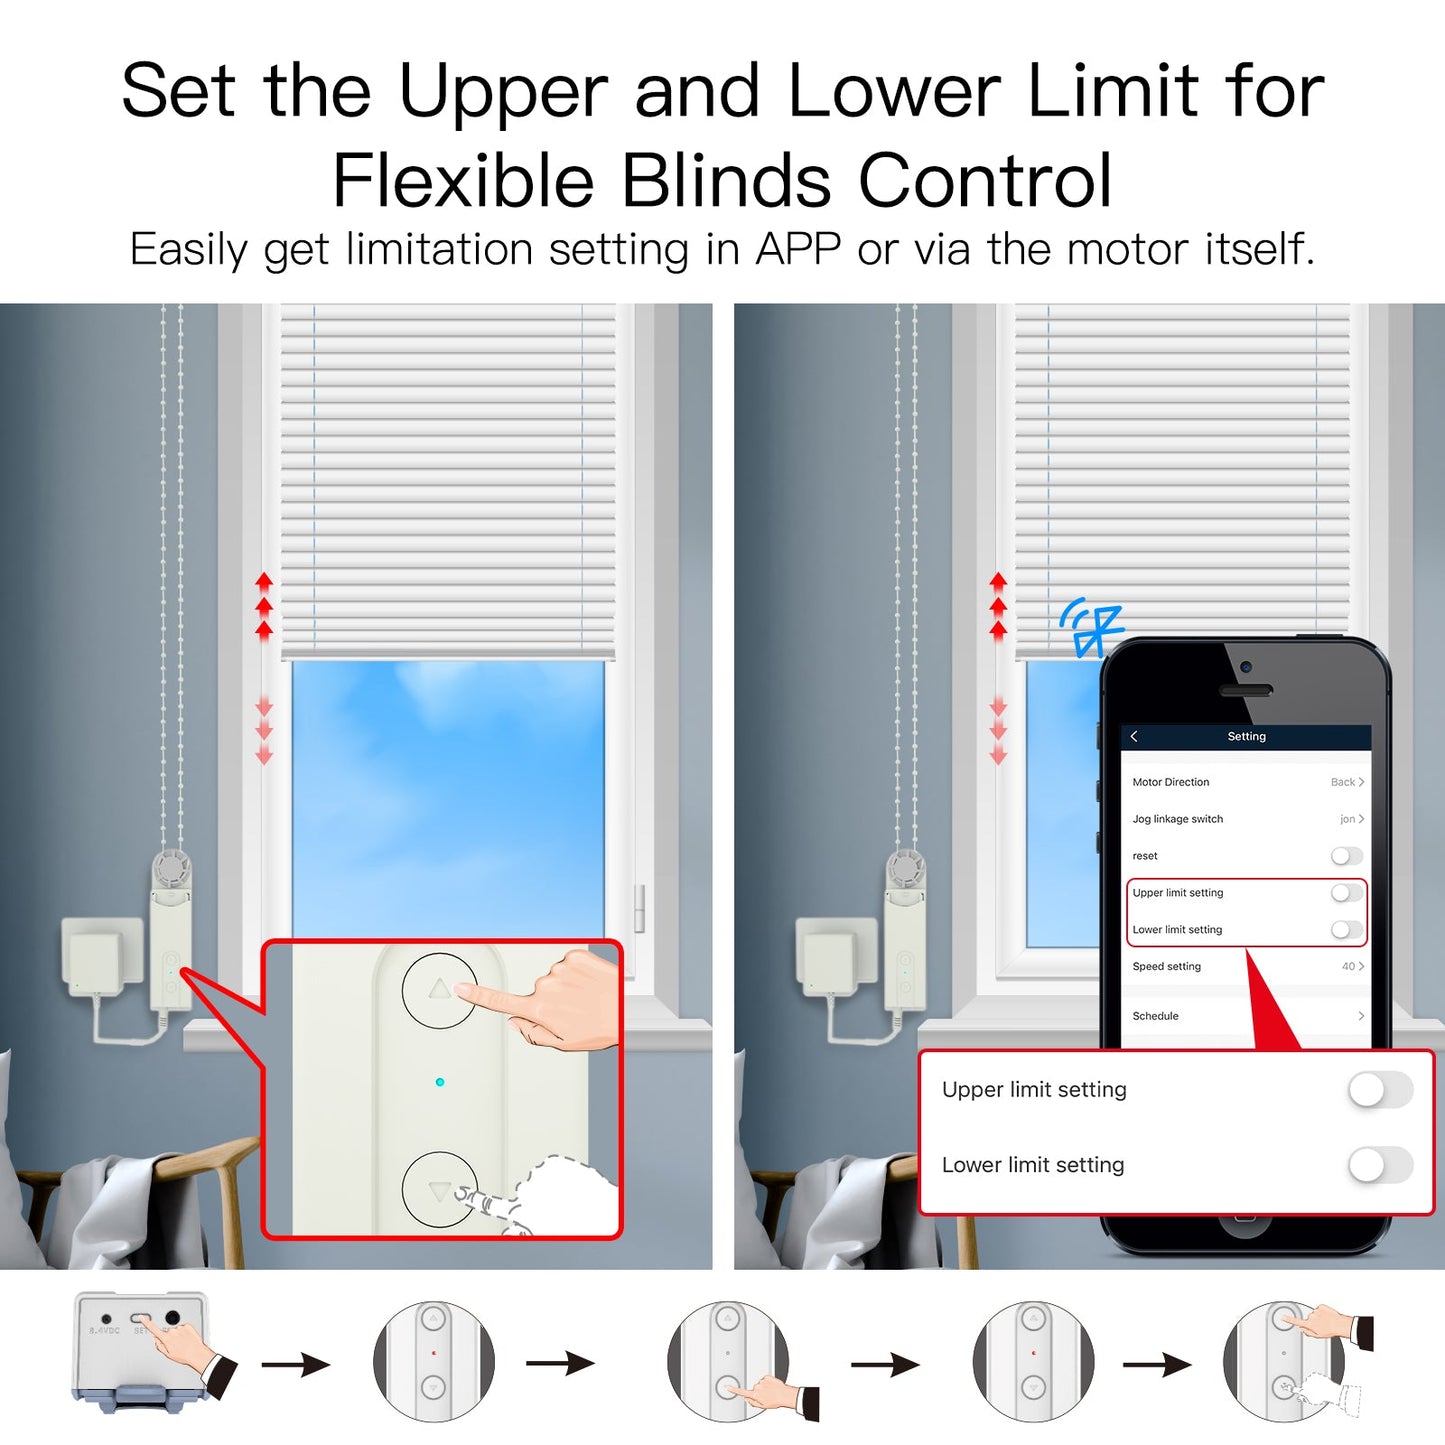 Set the Upper and L ower L _imit for Flexible Blinds Control - MOES